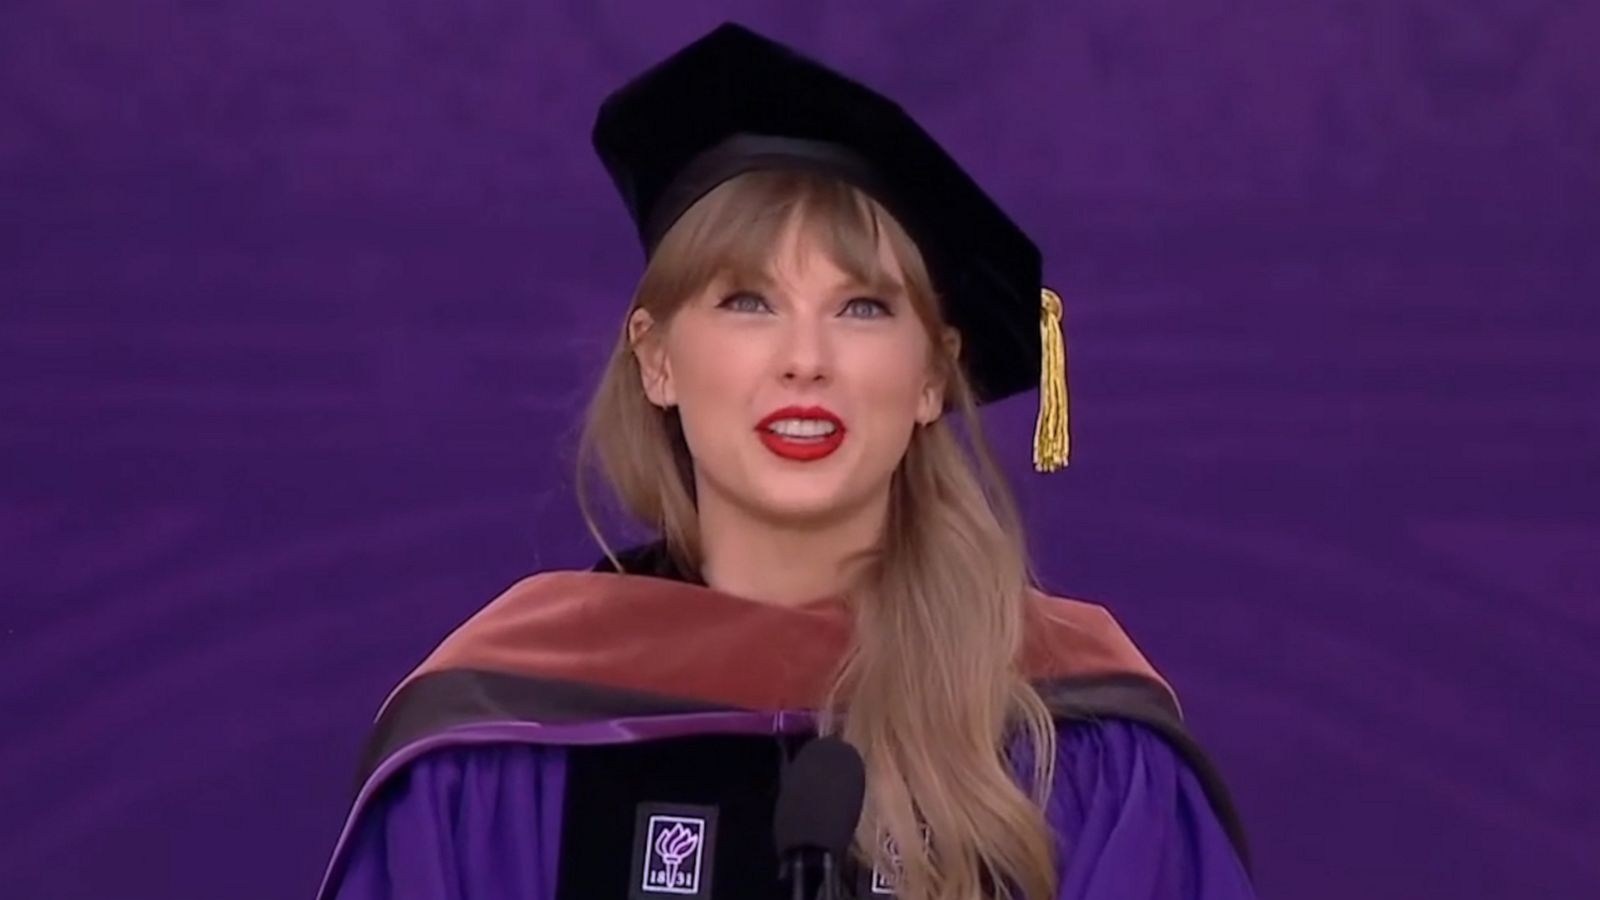 'Never be ashamed of trying' Taylor Swift tells Class of 2022 in